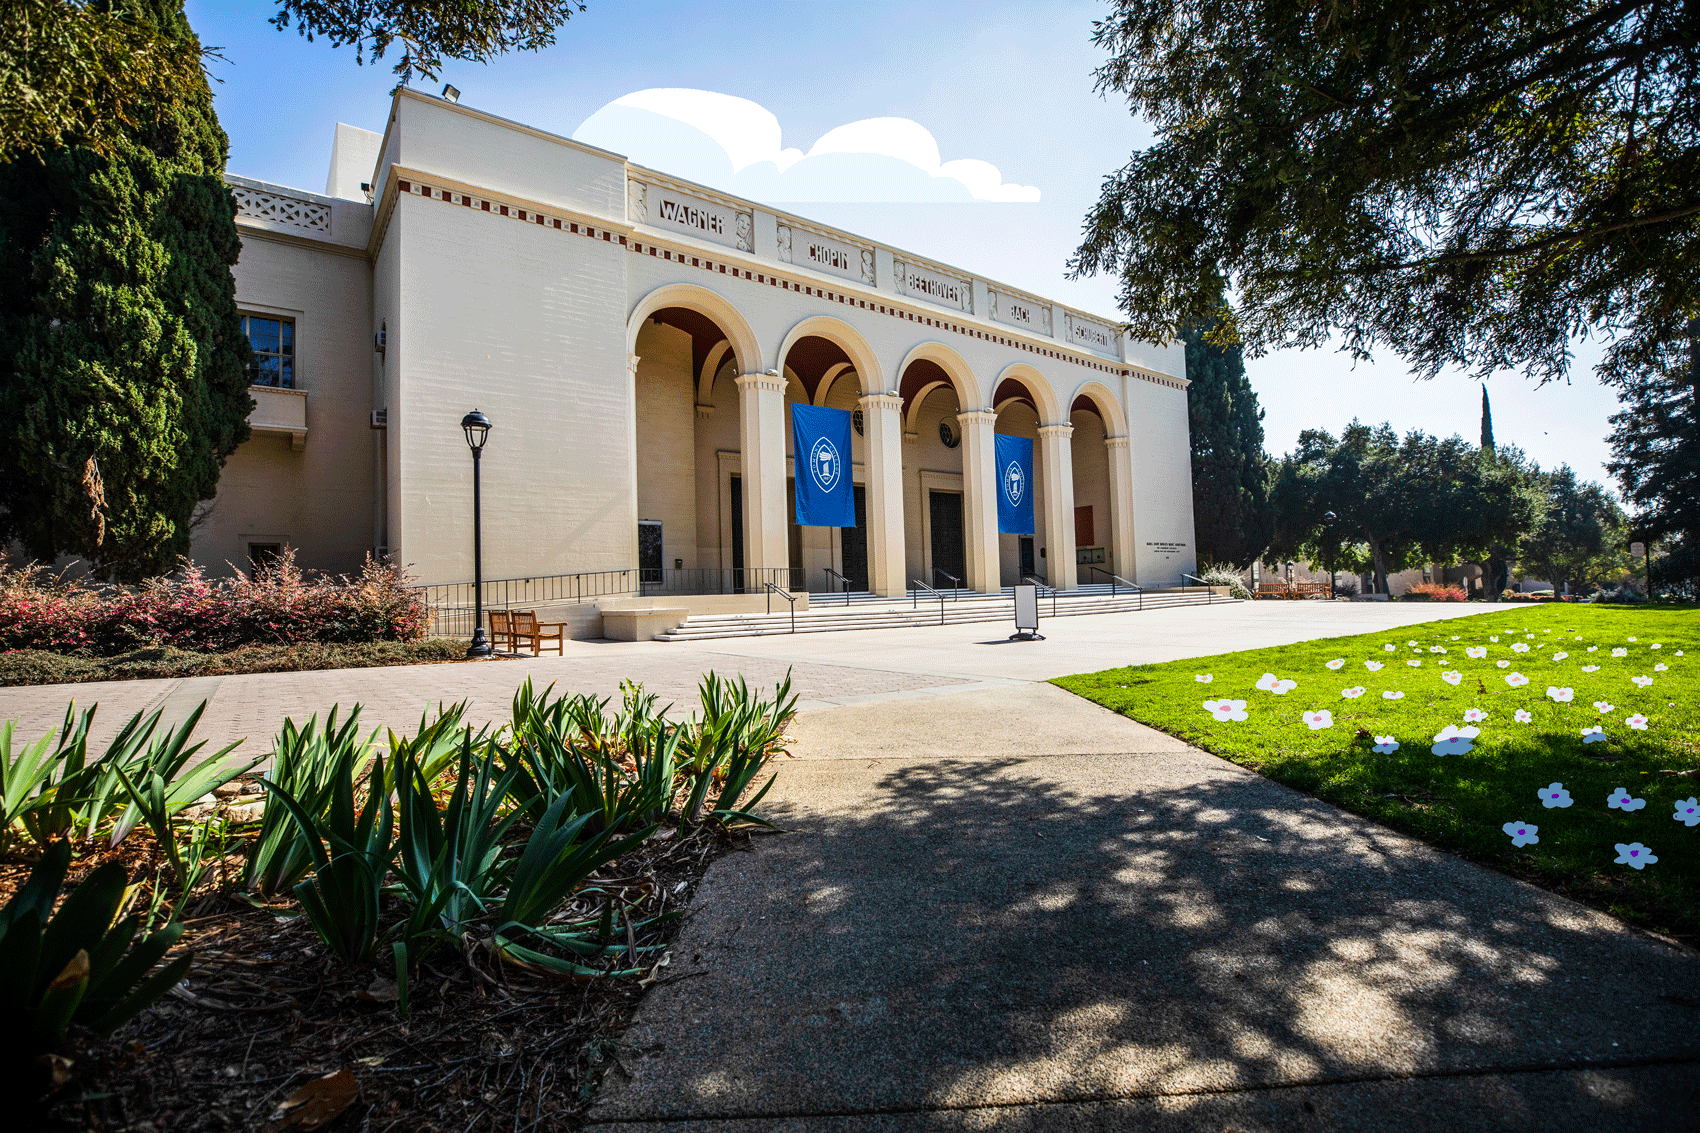 A large building with arched entryways is seen with illustrated clouds and flowers.